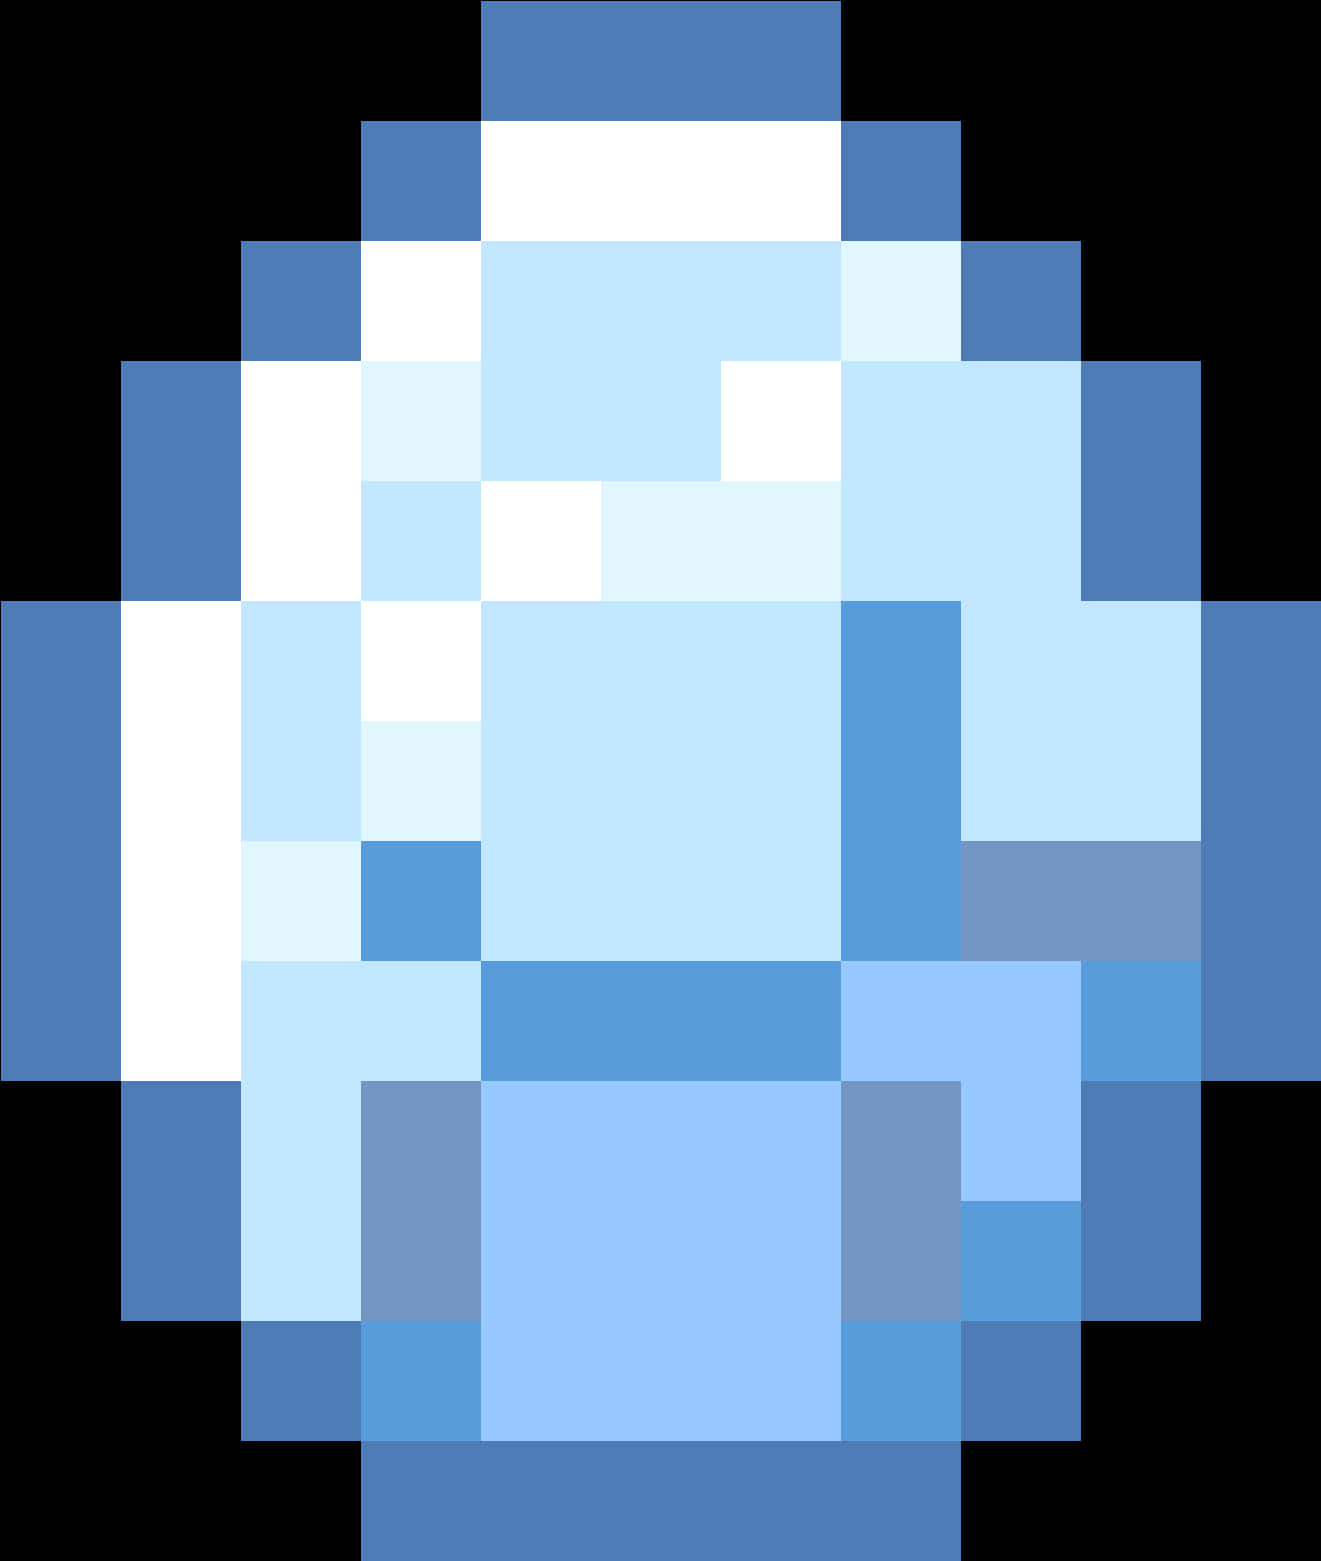 A Pixelated Image Of A Blue And White Figure